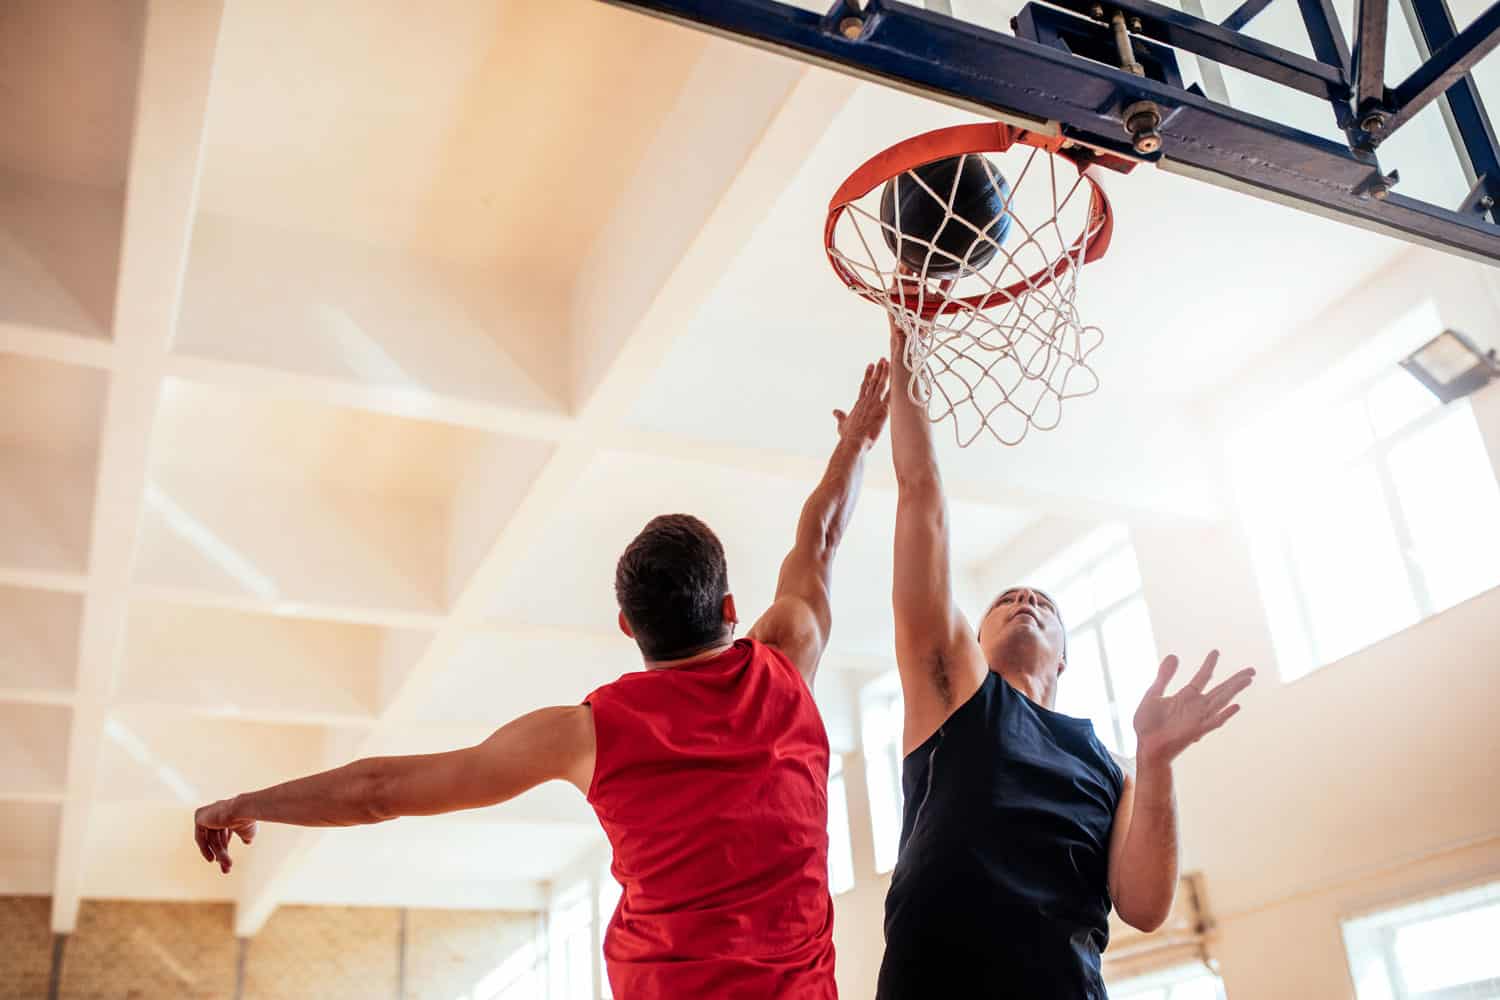 Photo of two basketball players dunking basketball in hoop.